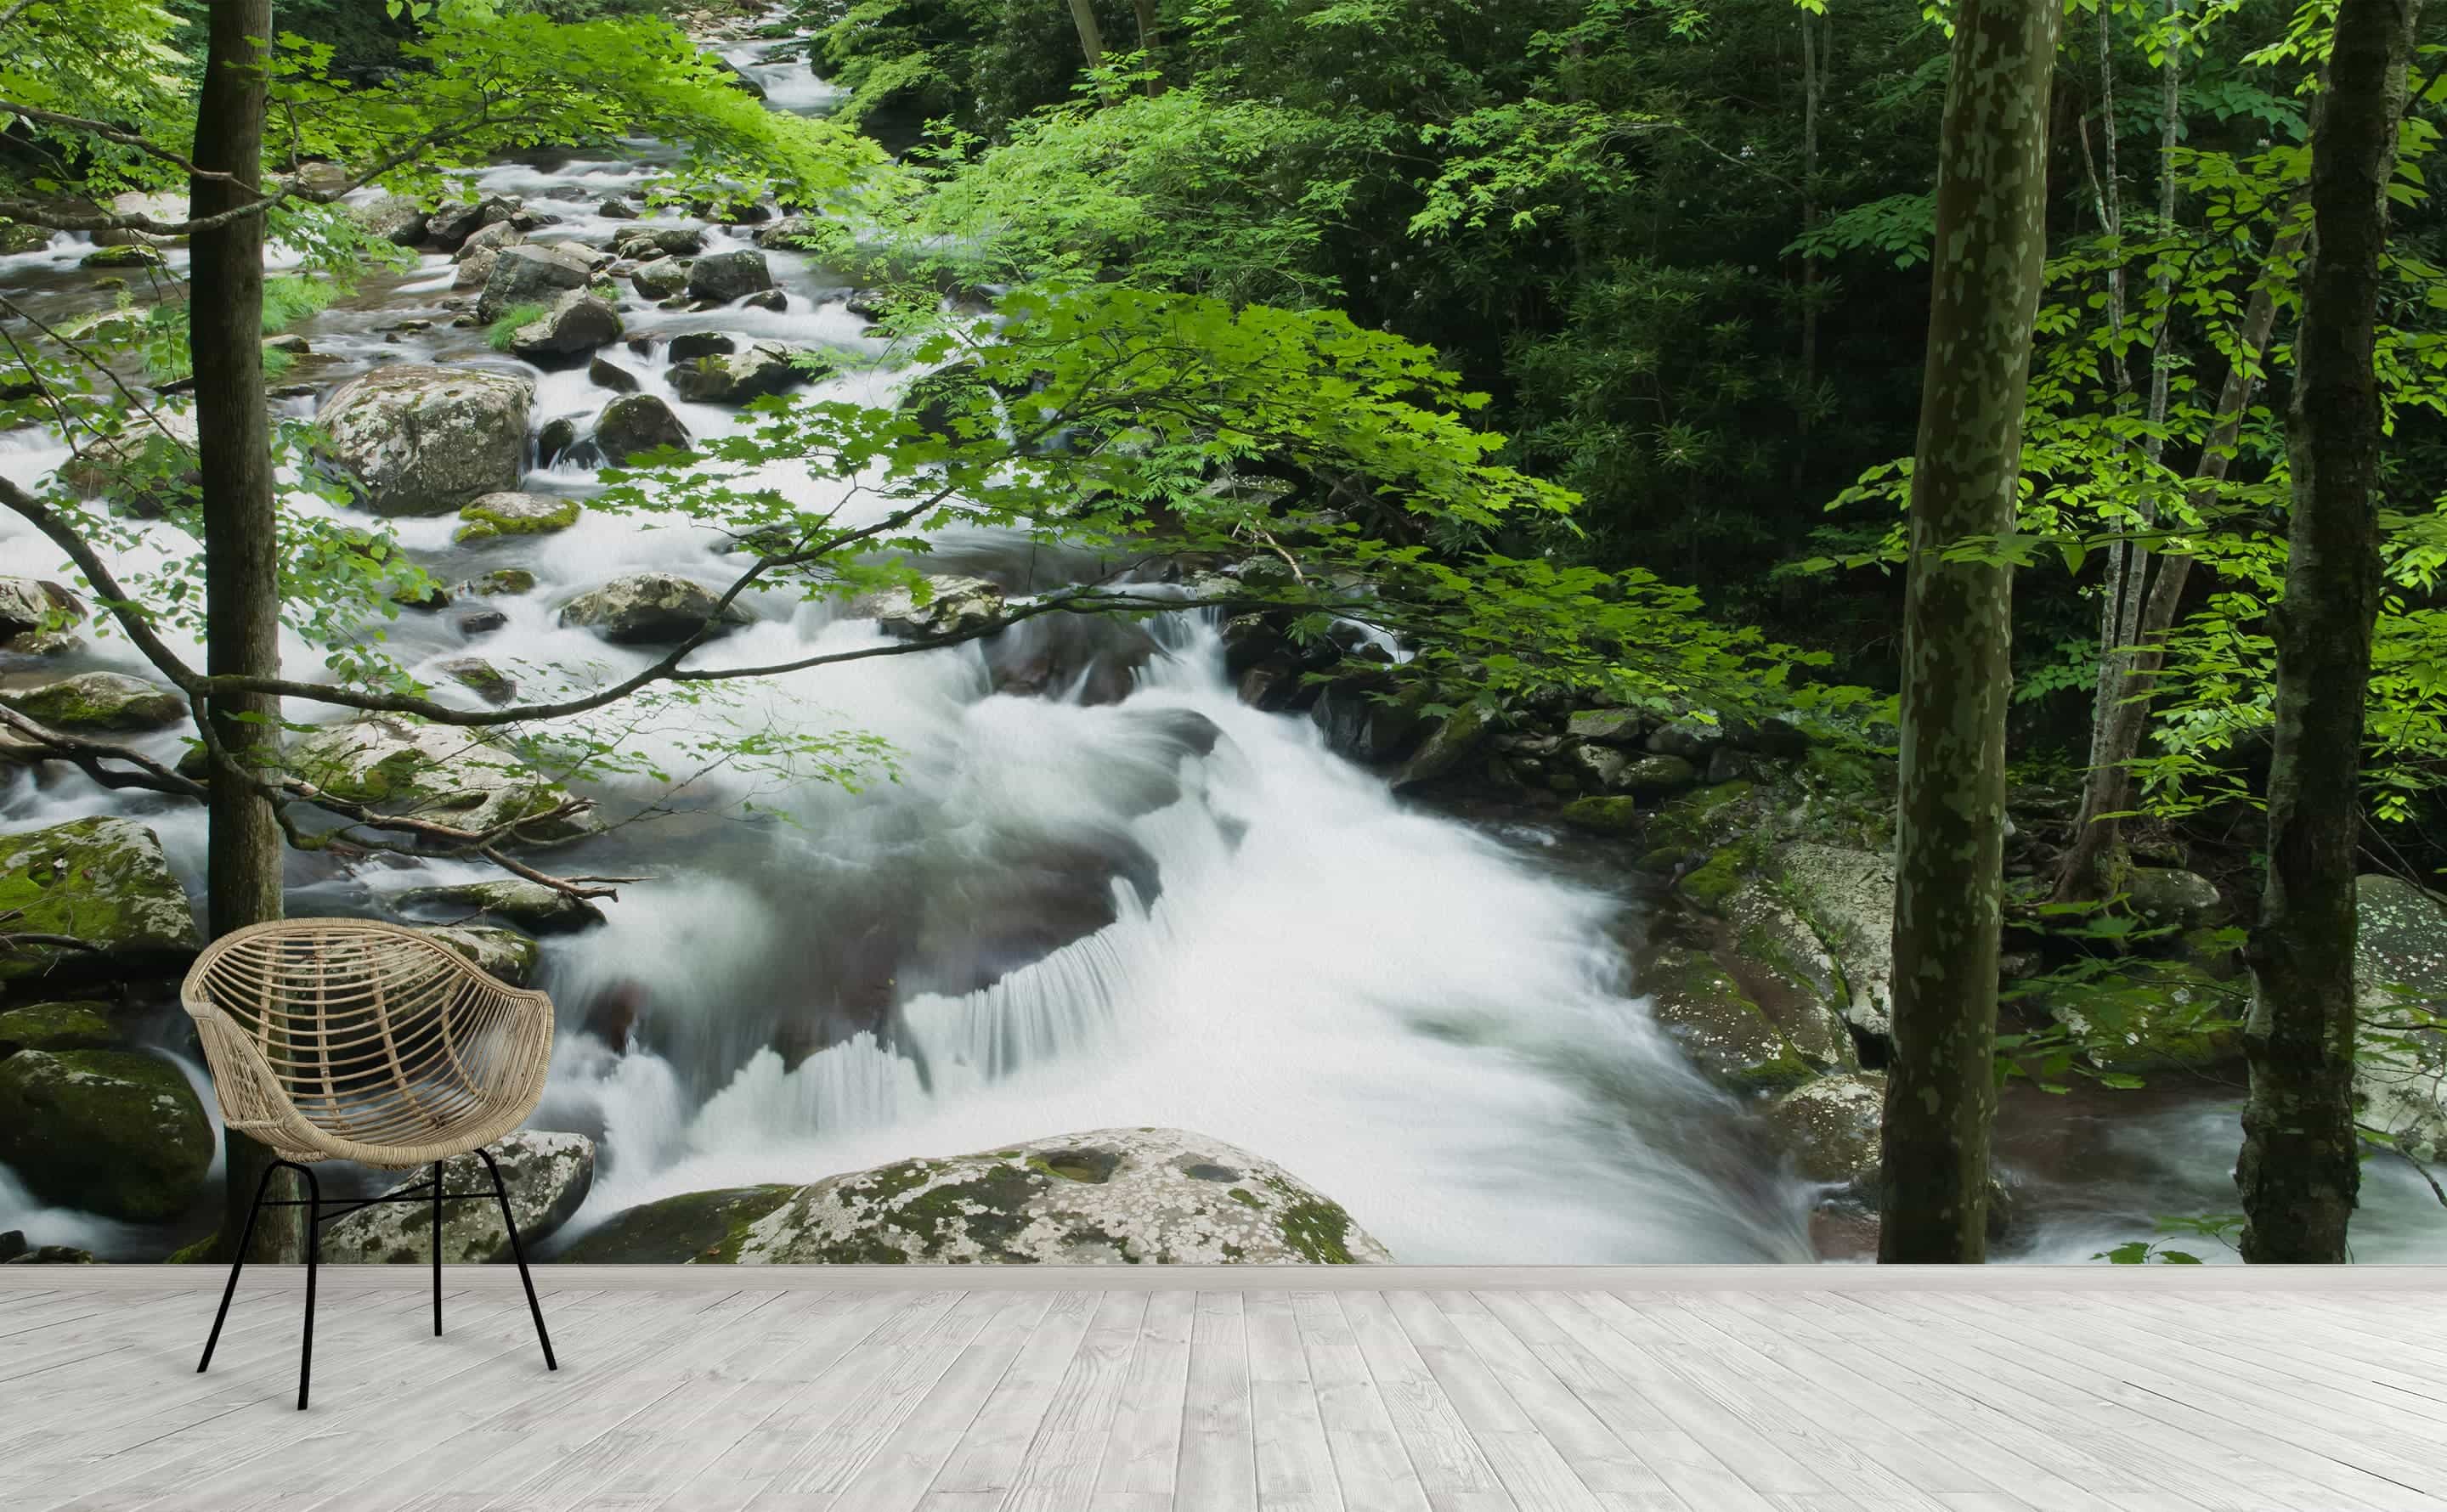 Little River Smoky Mountains Wall Mural by Walls Need Love®